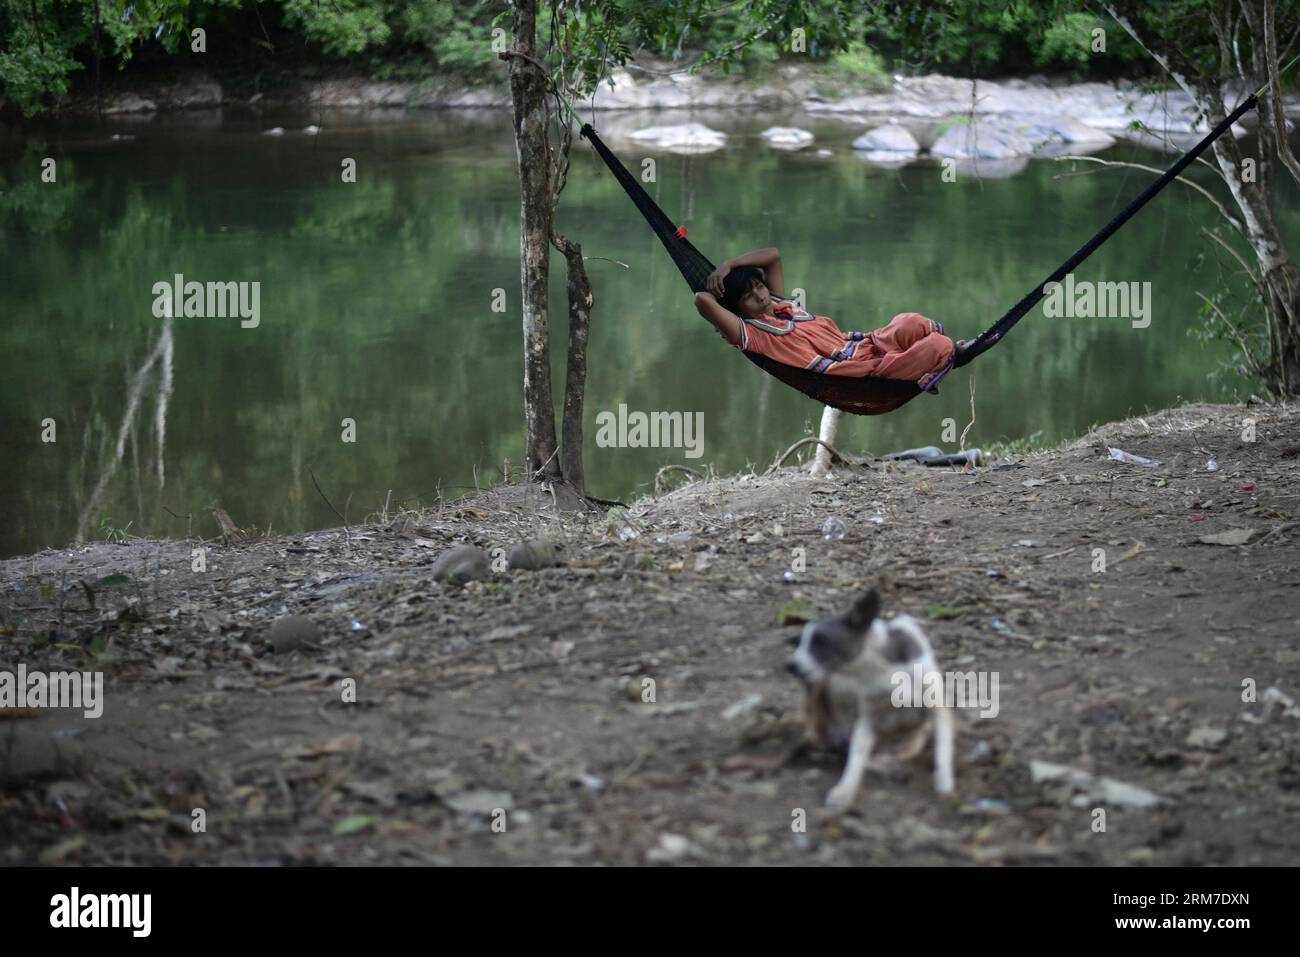 A woman of the Ngabe Bugle ethnic group rests in a camp near the Tabasara river bank in the Ngabe Bugle indigenous region, 450 km west of Panama City, capital of Panama, on Feb. 24, 2014. The Ngabe Bugle indigenous region is located in the western region of Panama, and covers an area of 6,968 square km, with 91 per cent of its population living in extreme poverty. Native leaders of the Ngabe Bugle region declared a national alert , because of the eviction notice issued by a company which is developing the hydro-electric project Barro Blanco . The project will use the water from Tabasara river Stock Photo